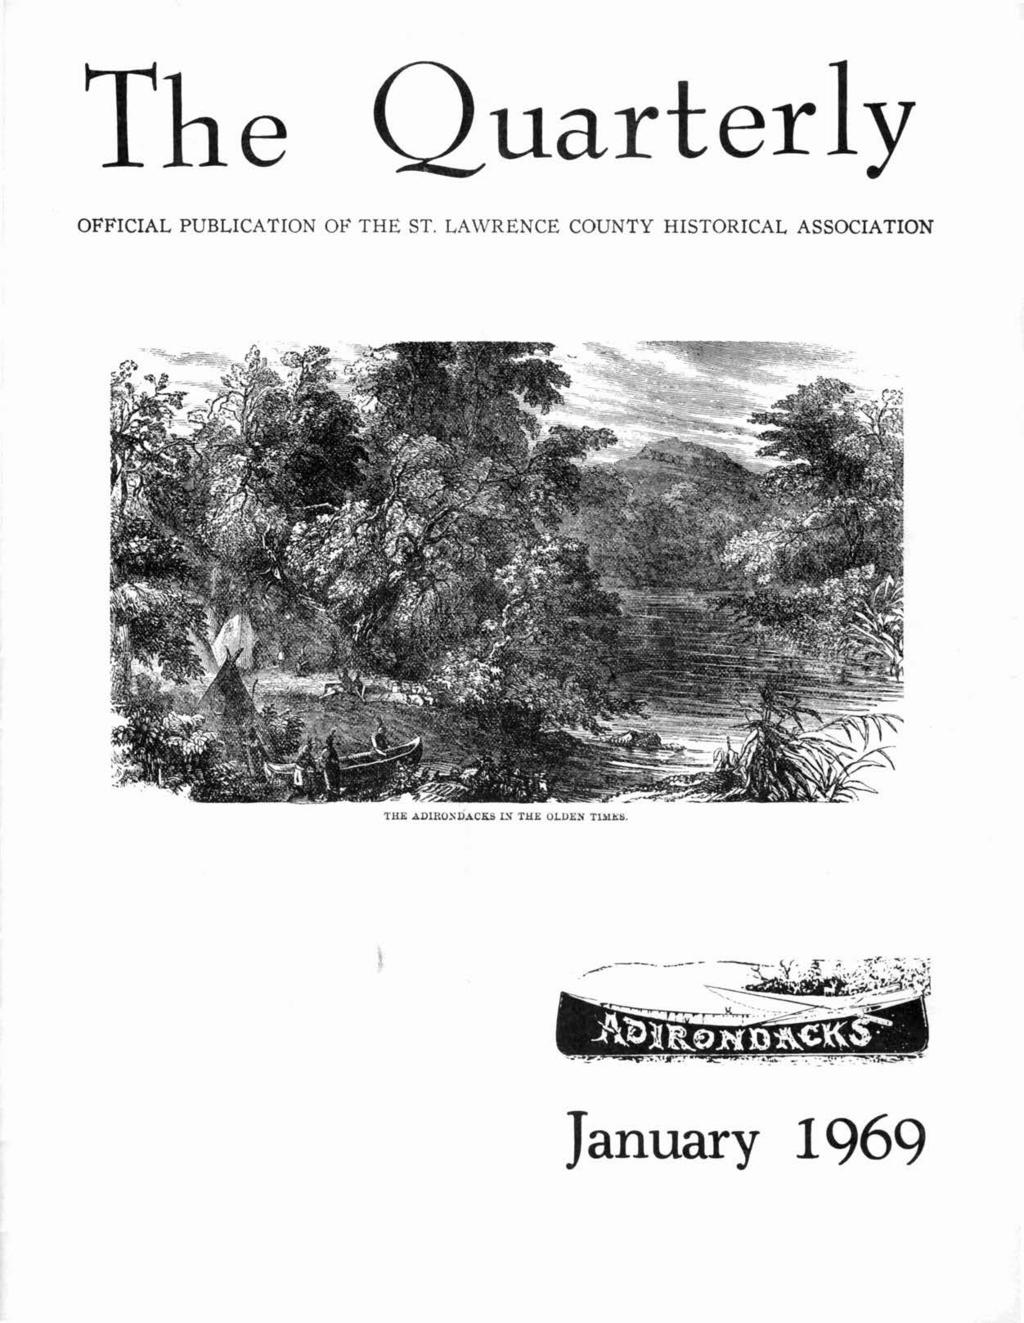 The Quarerly OFFICIAL PUBLICATION OF THE ST.